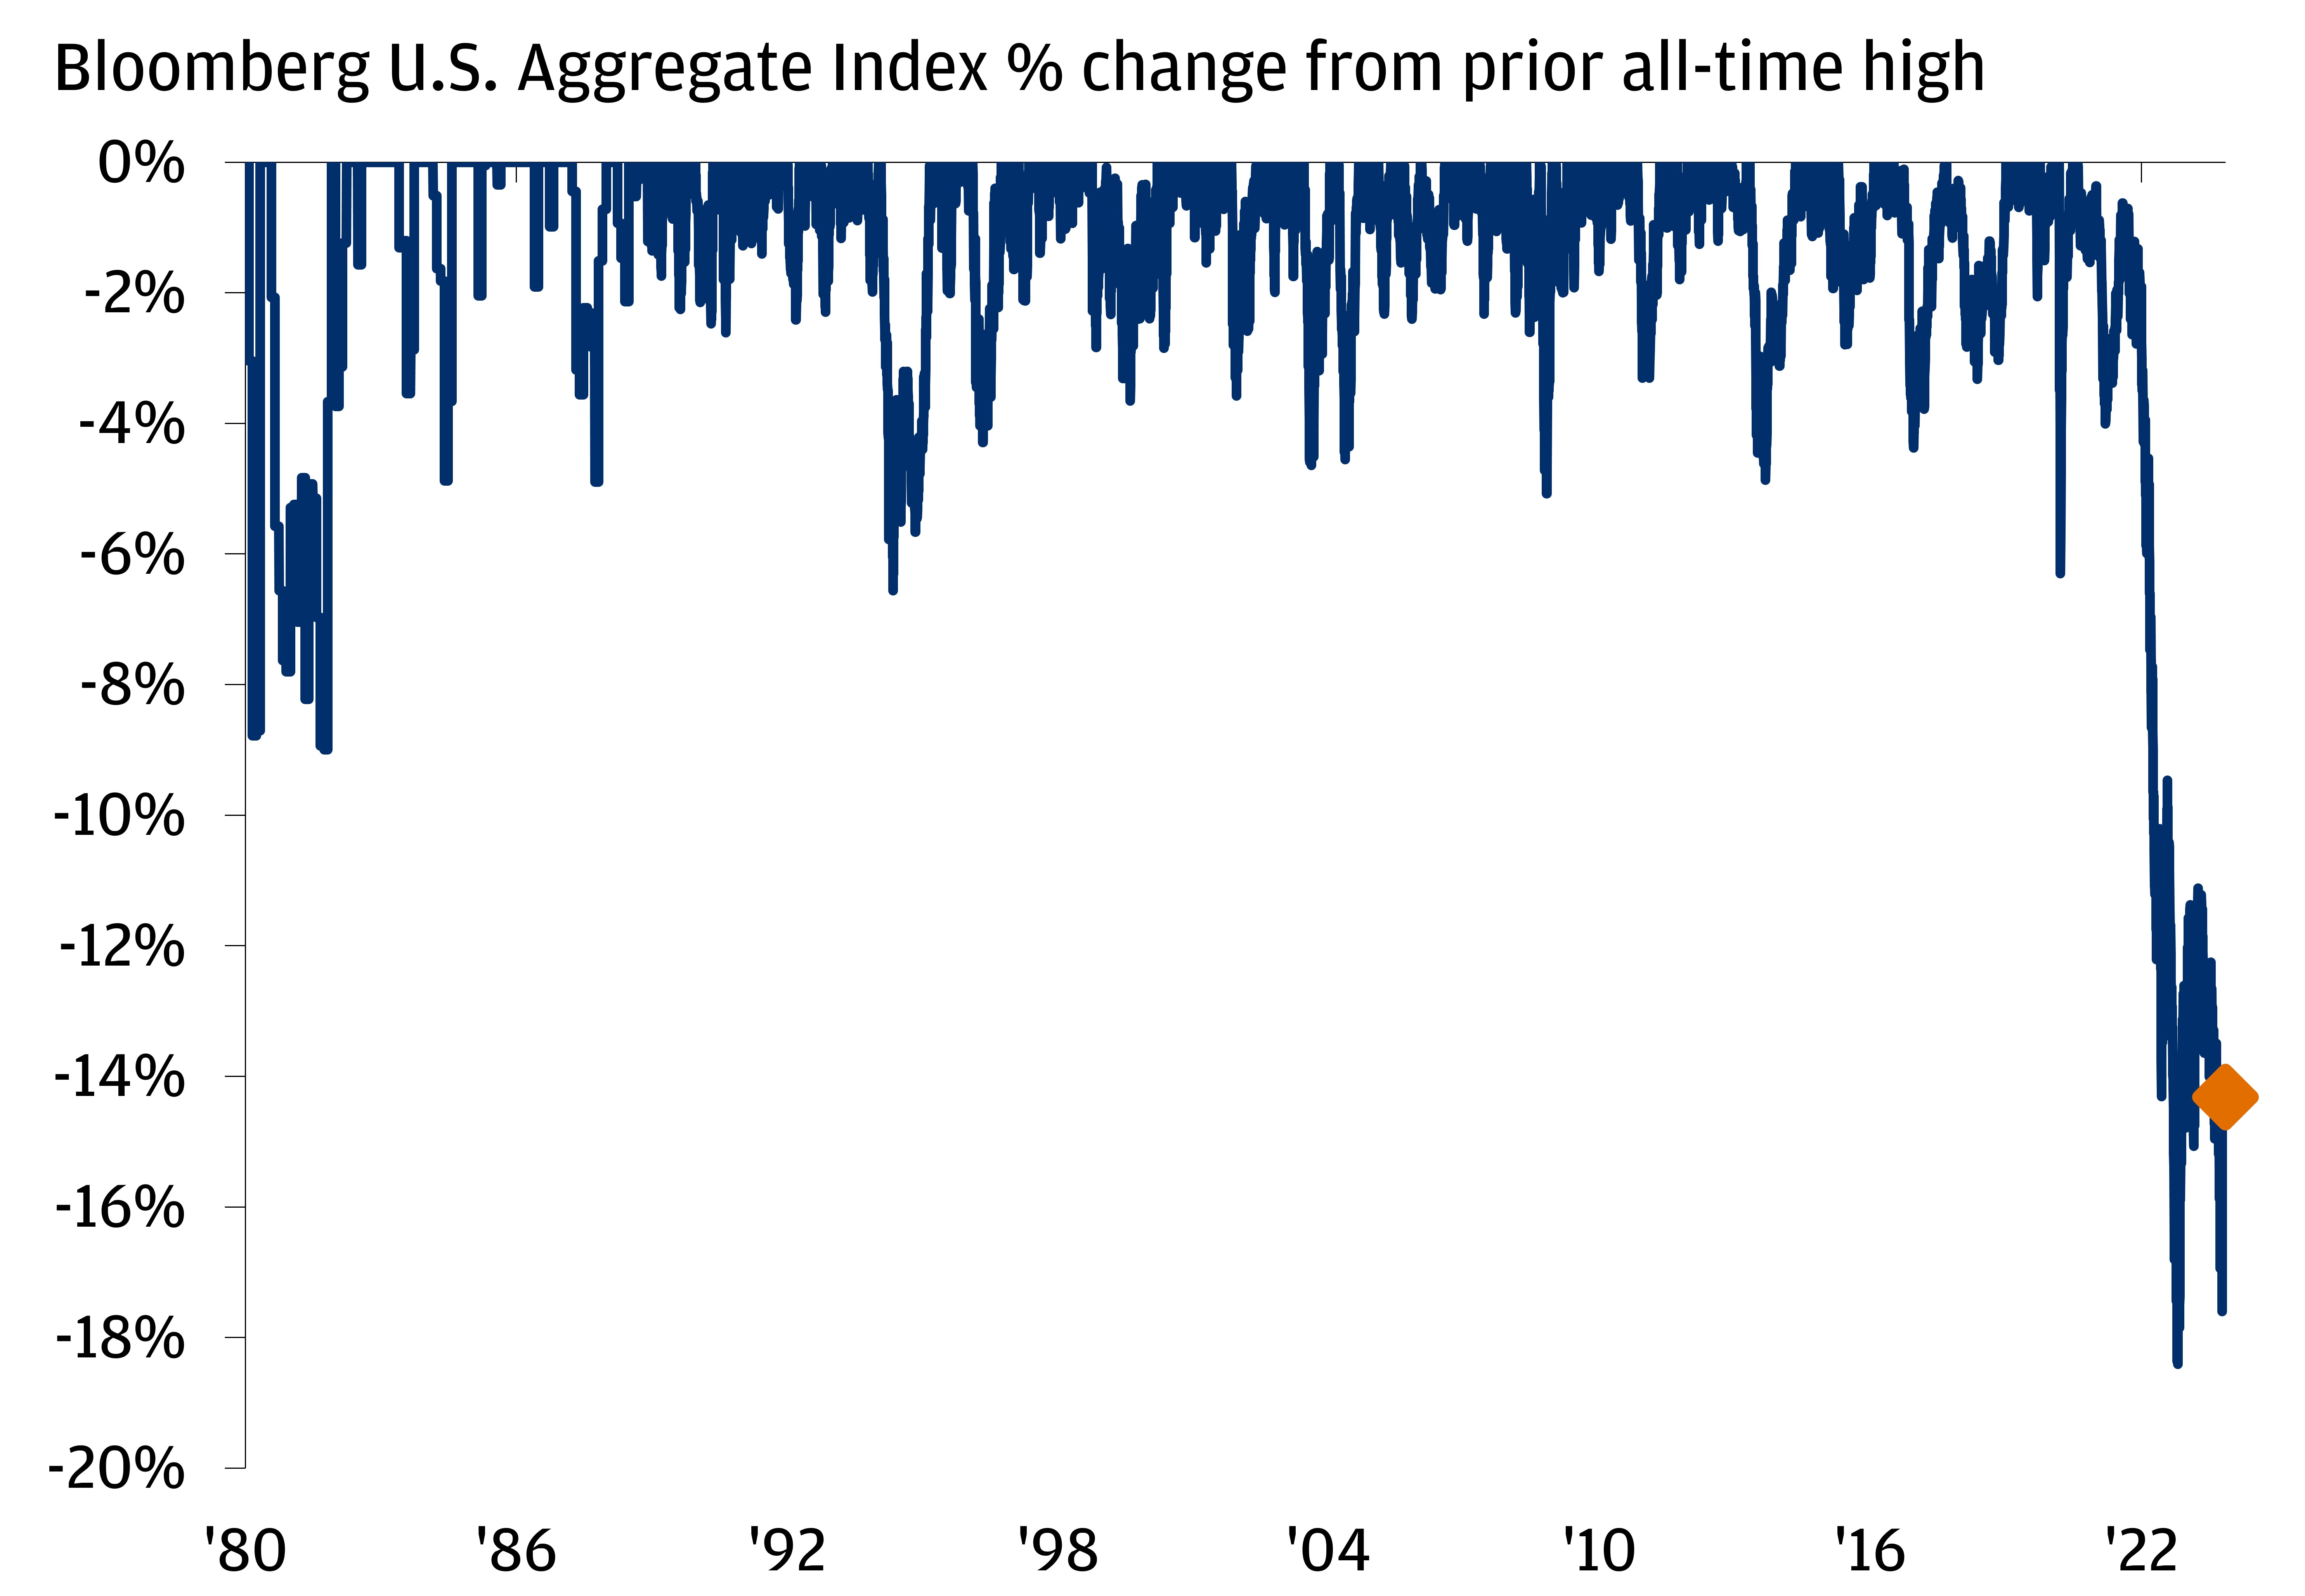 The chart describes the % change of Bloomberg U.S. Aggregate Index from prior all-time high.